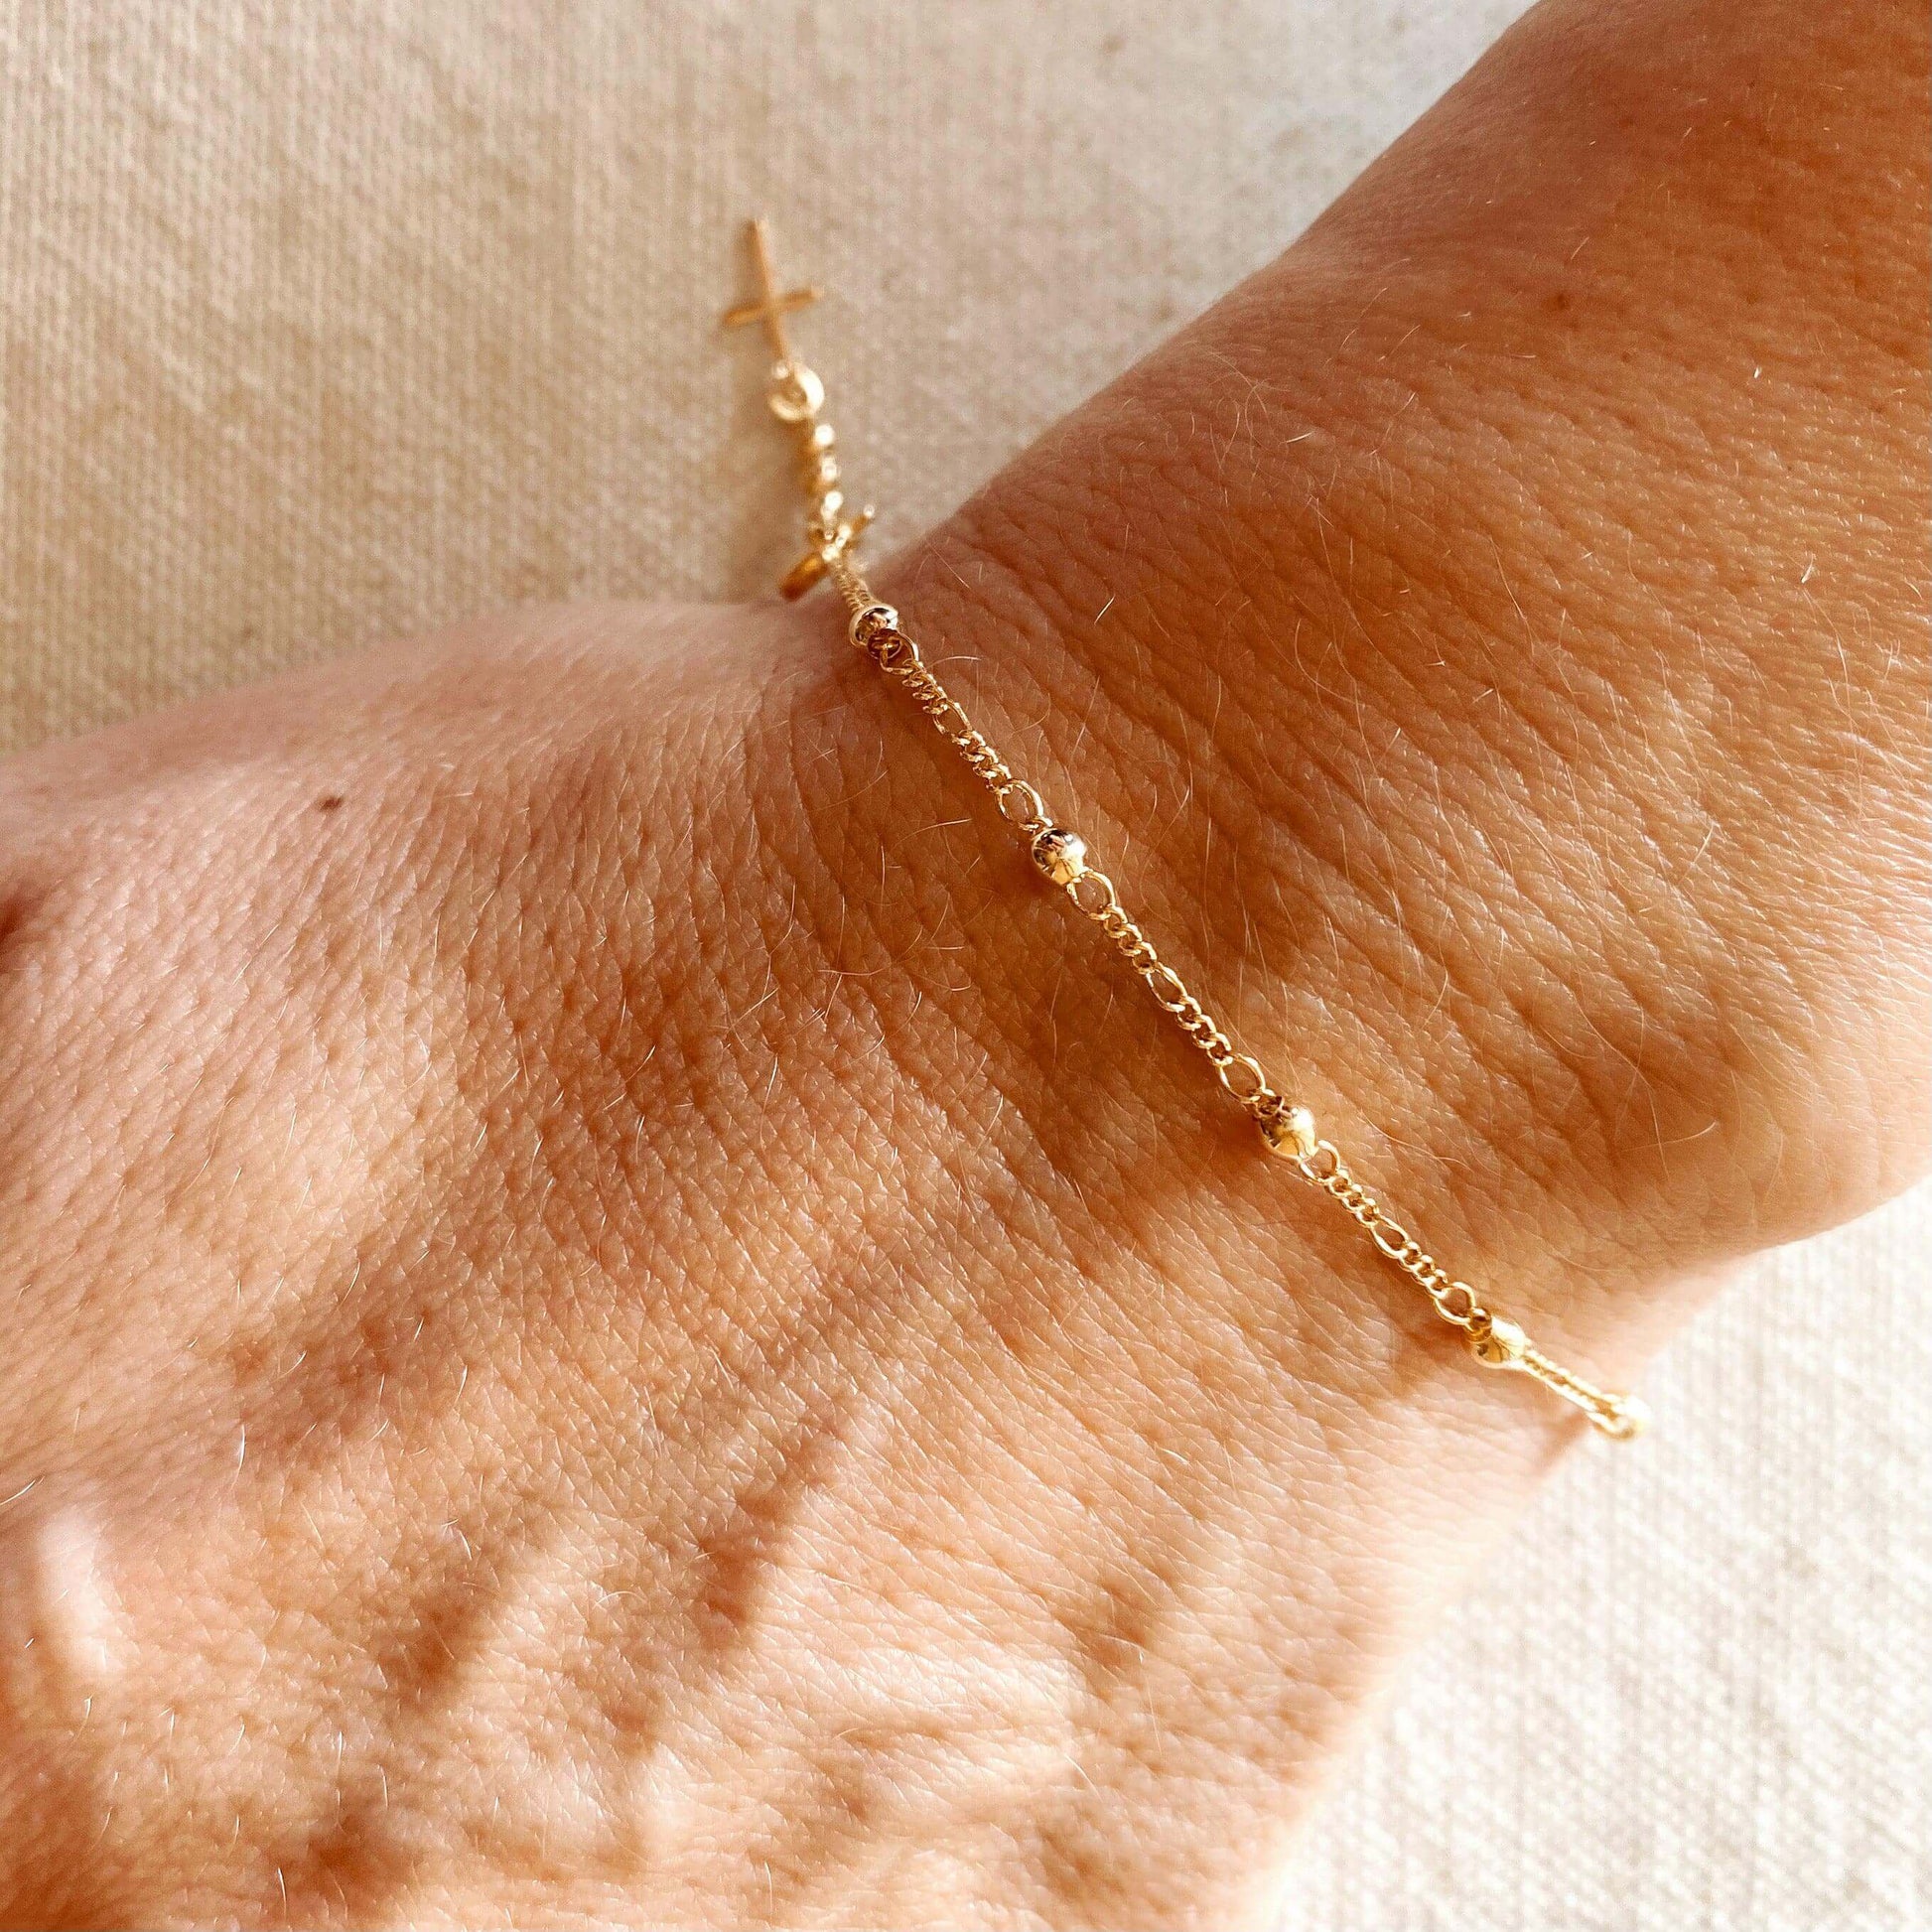 14K Gold Plated Brass Adjustable Chain Extension,bracelet Extender,gold  Bracelet Adjustable Chain,bracelet Extension Chain -  Sweden